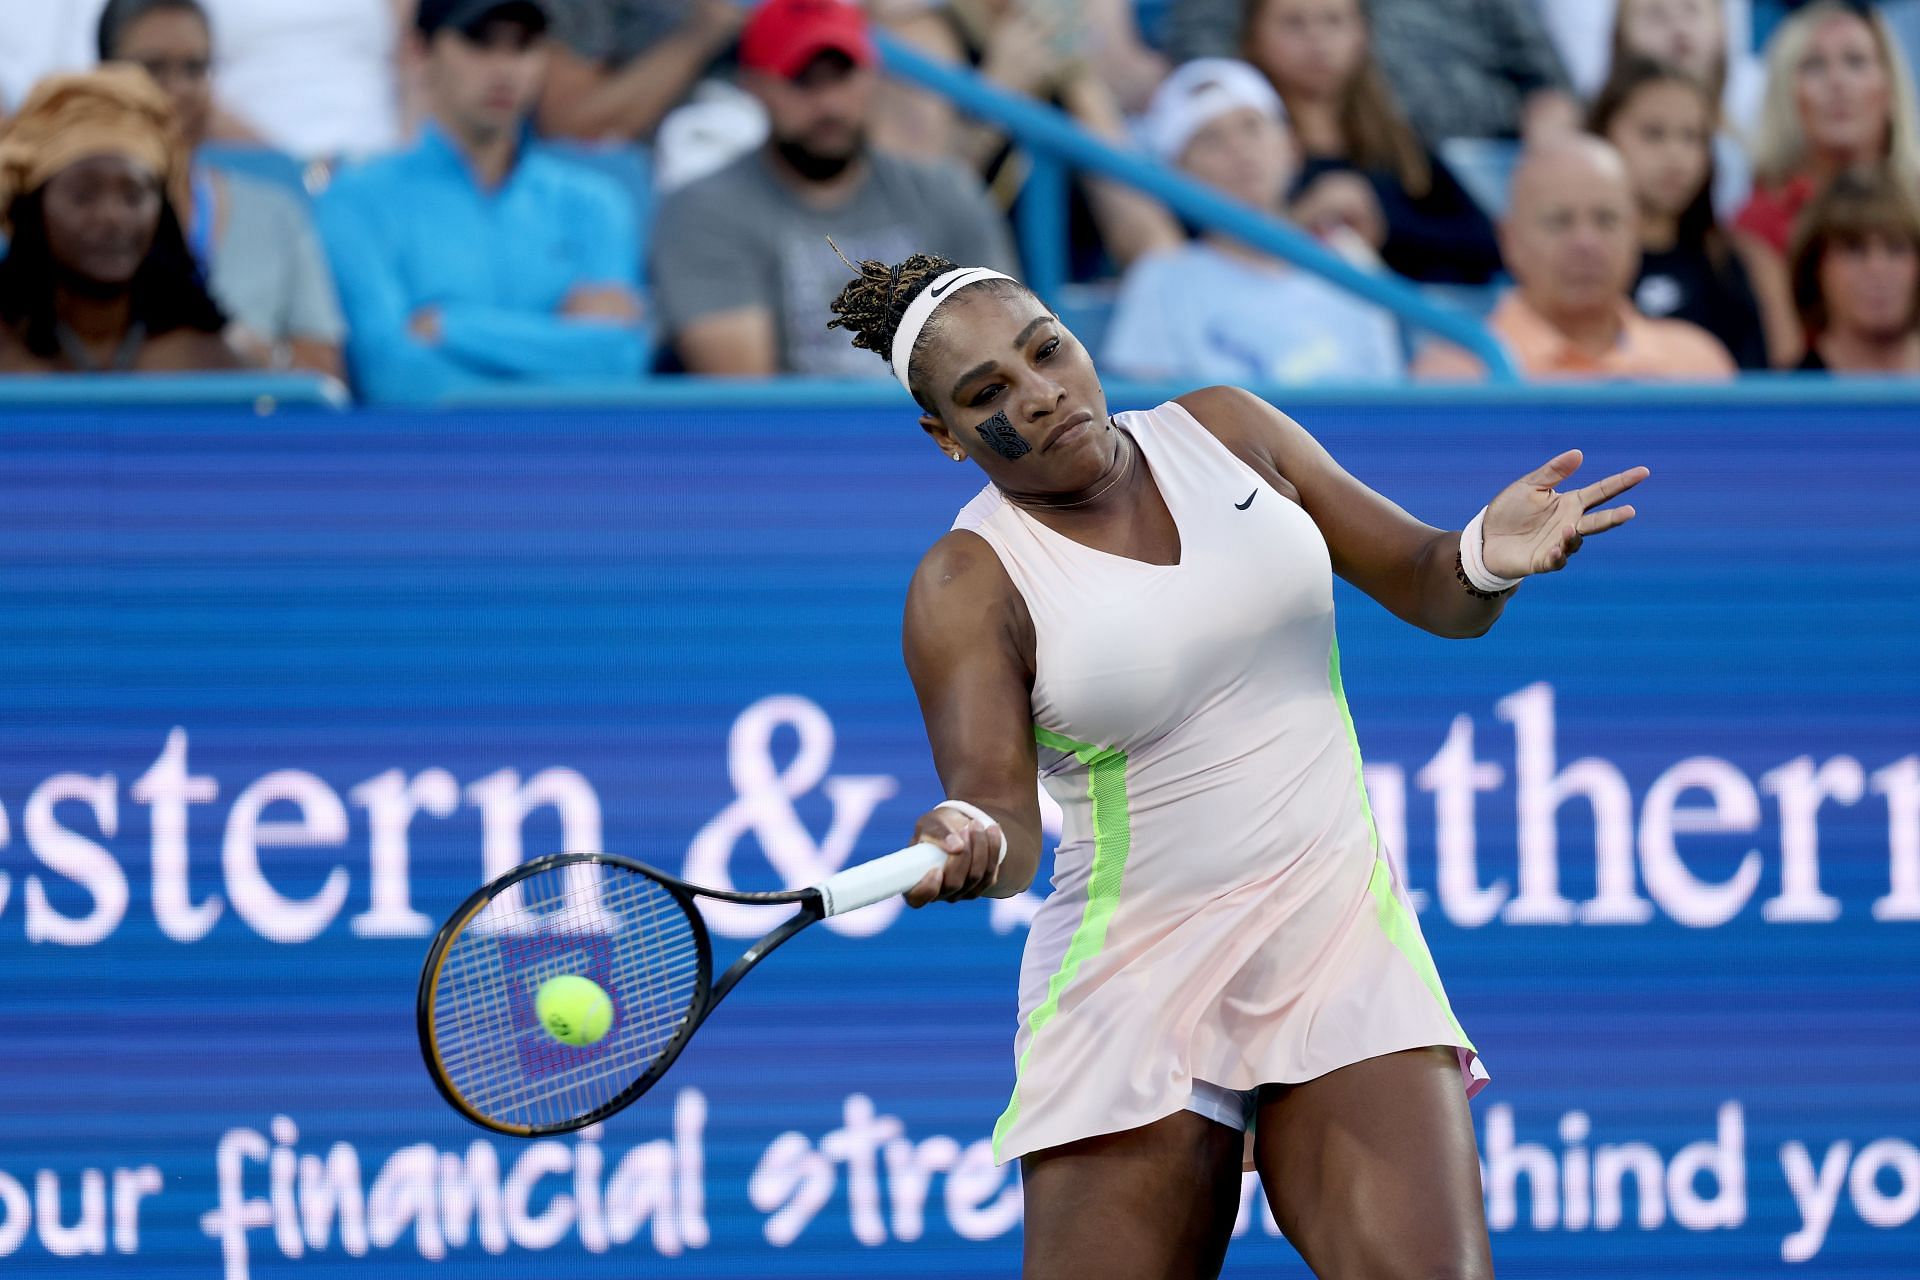 Serena Williams will play her last US Open this year